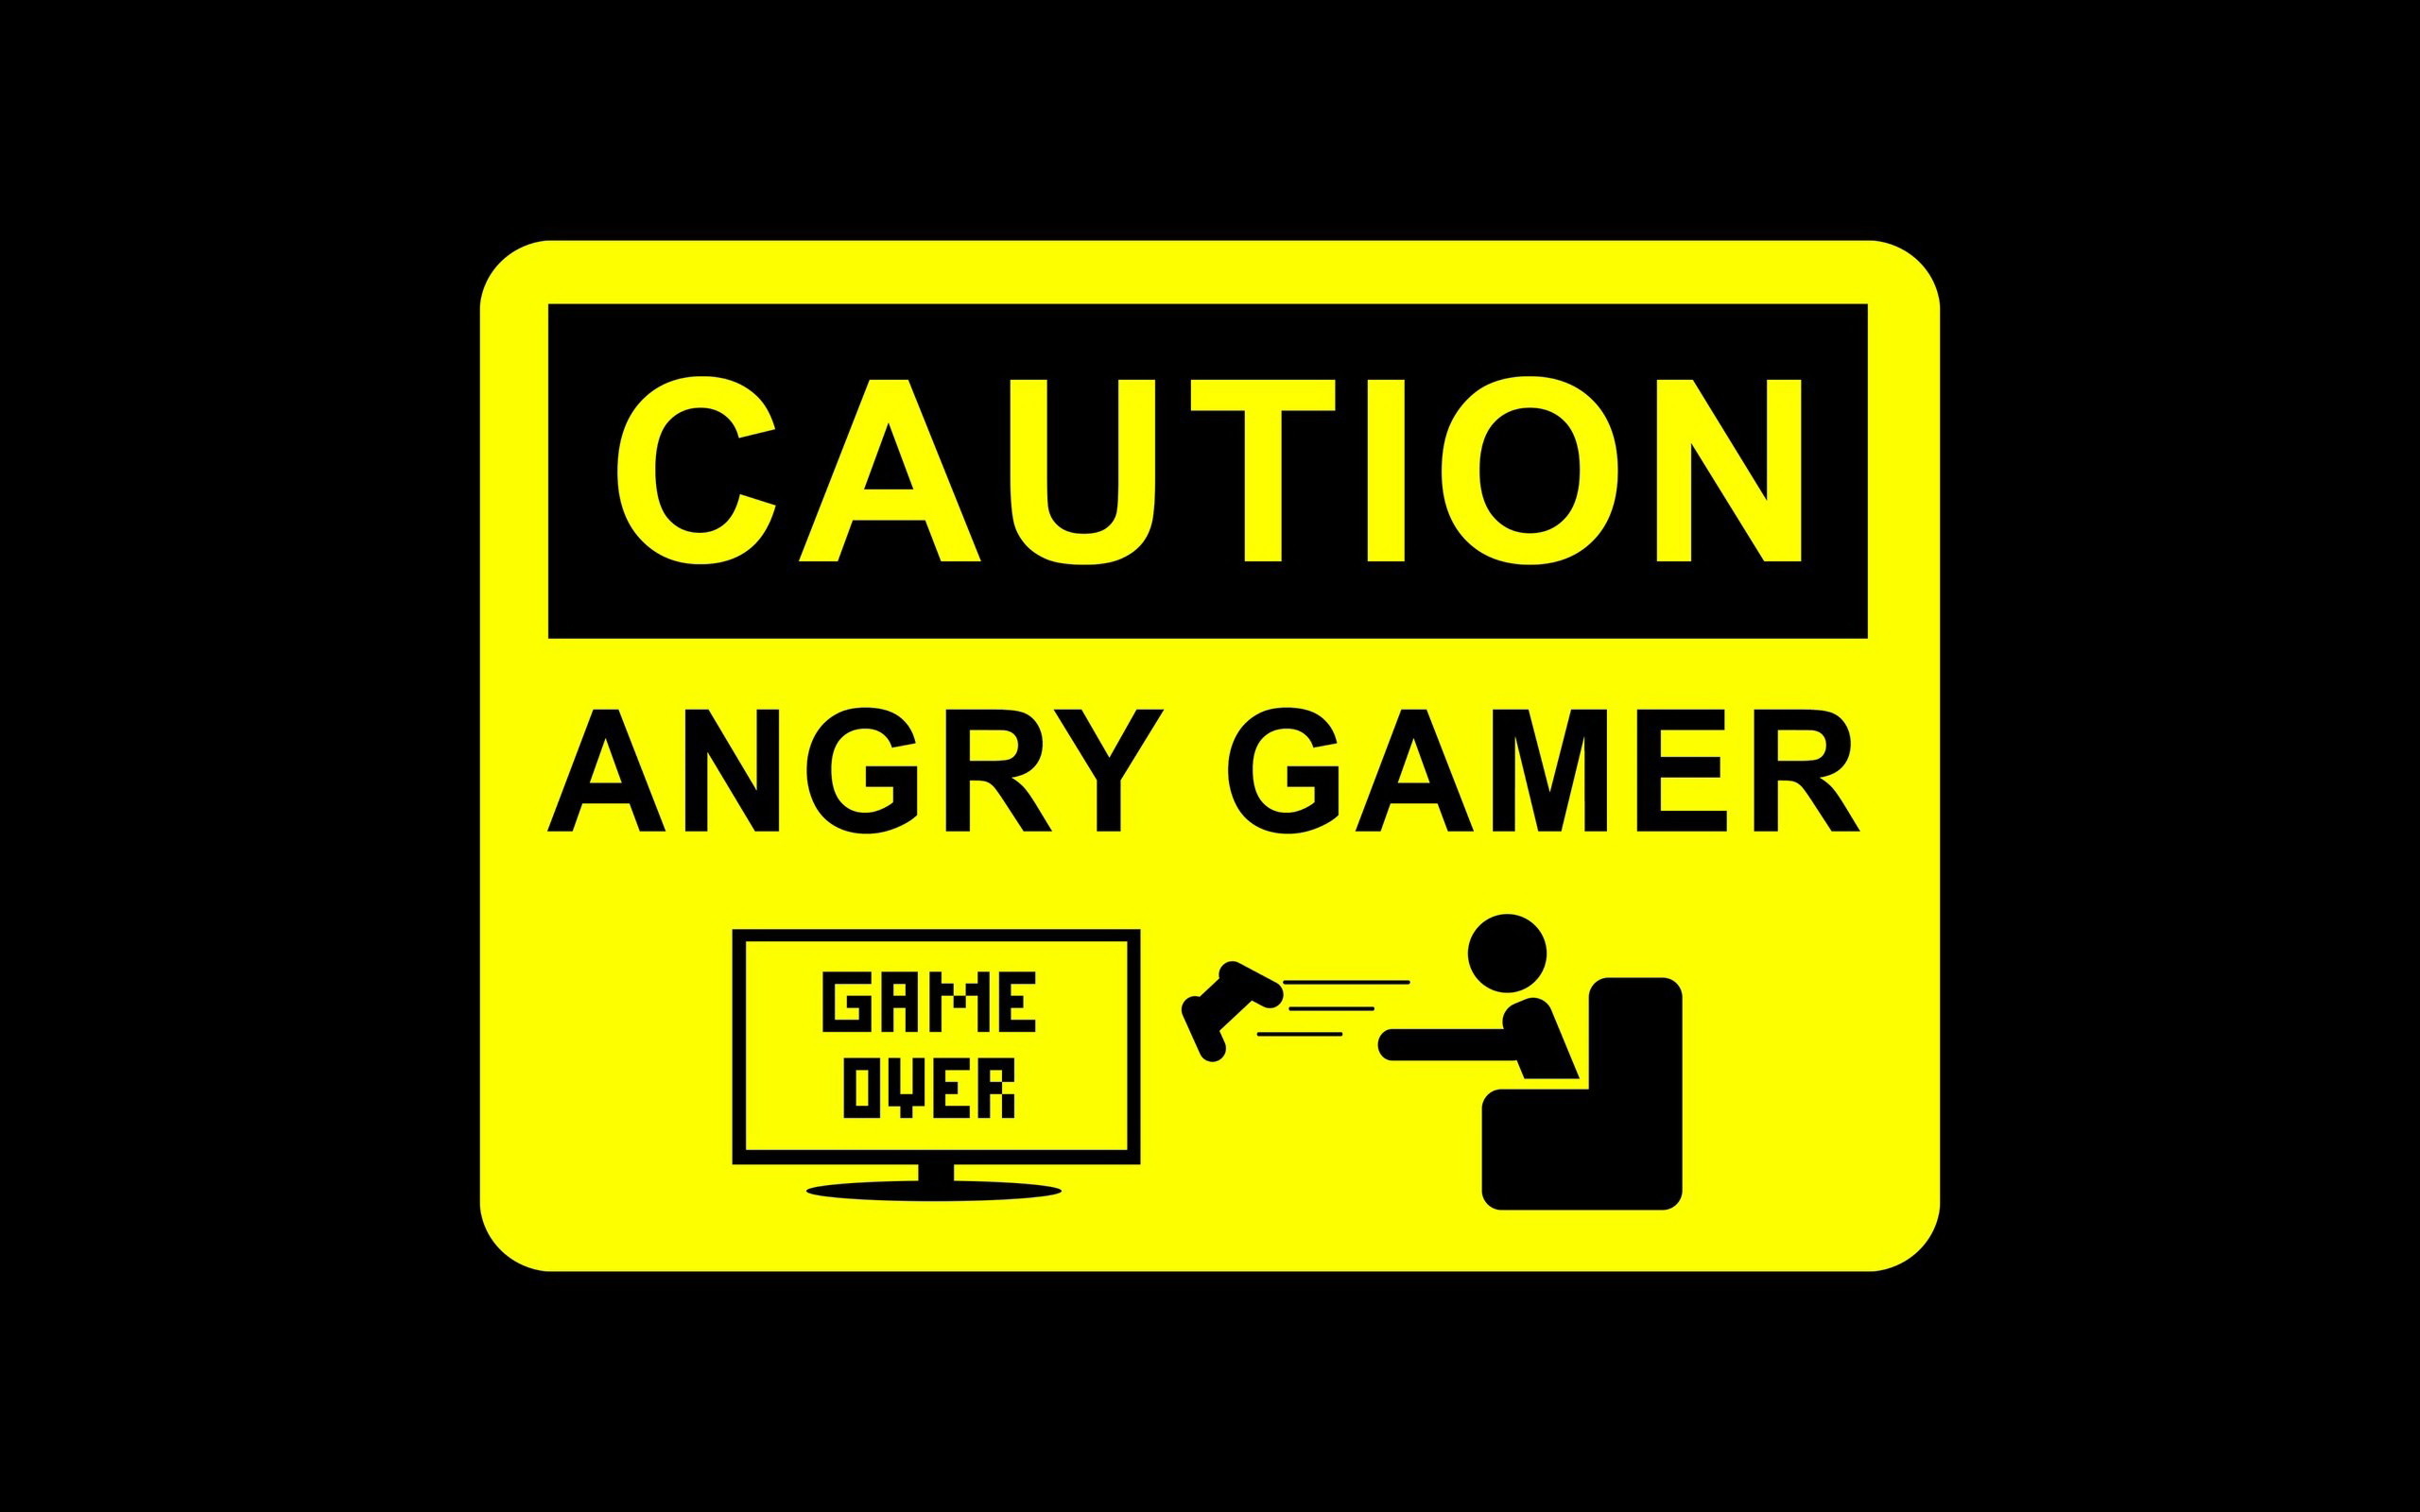 2560x1600 Caution: Angry Gamer - Game over Wallpaper